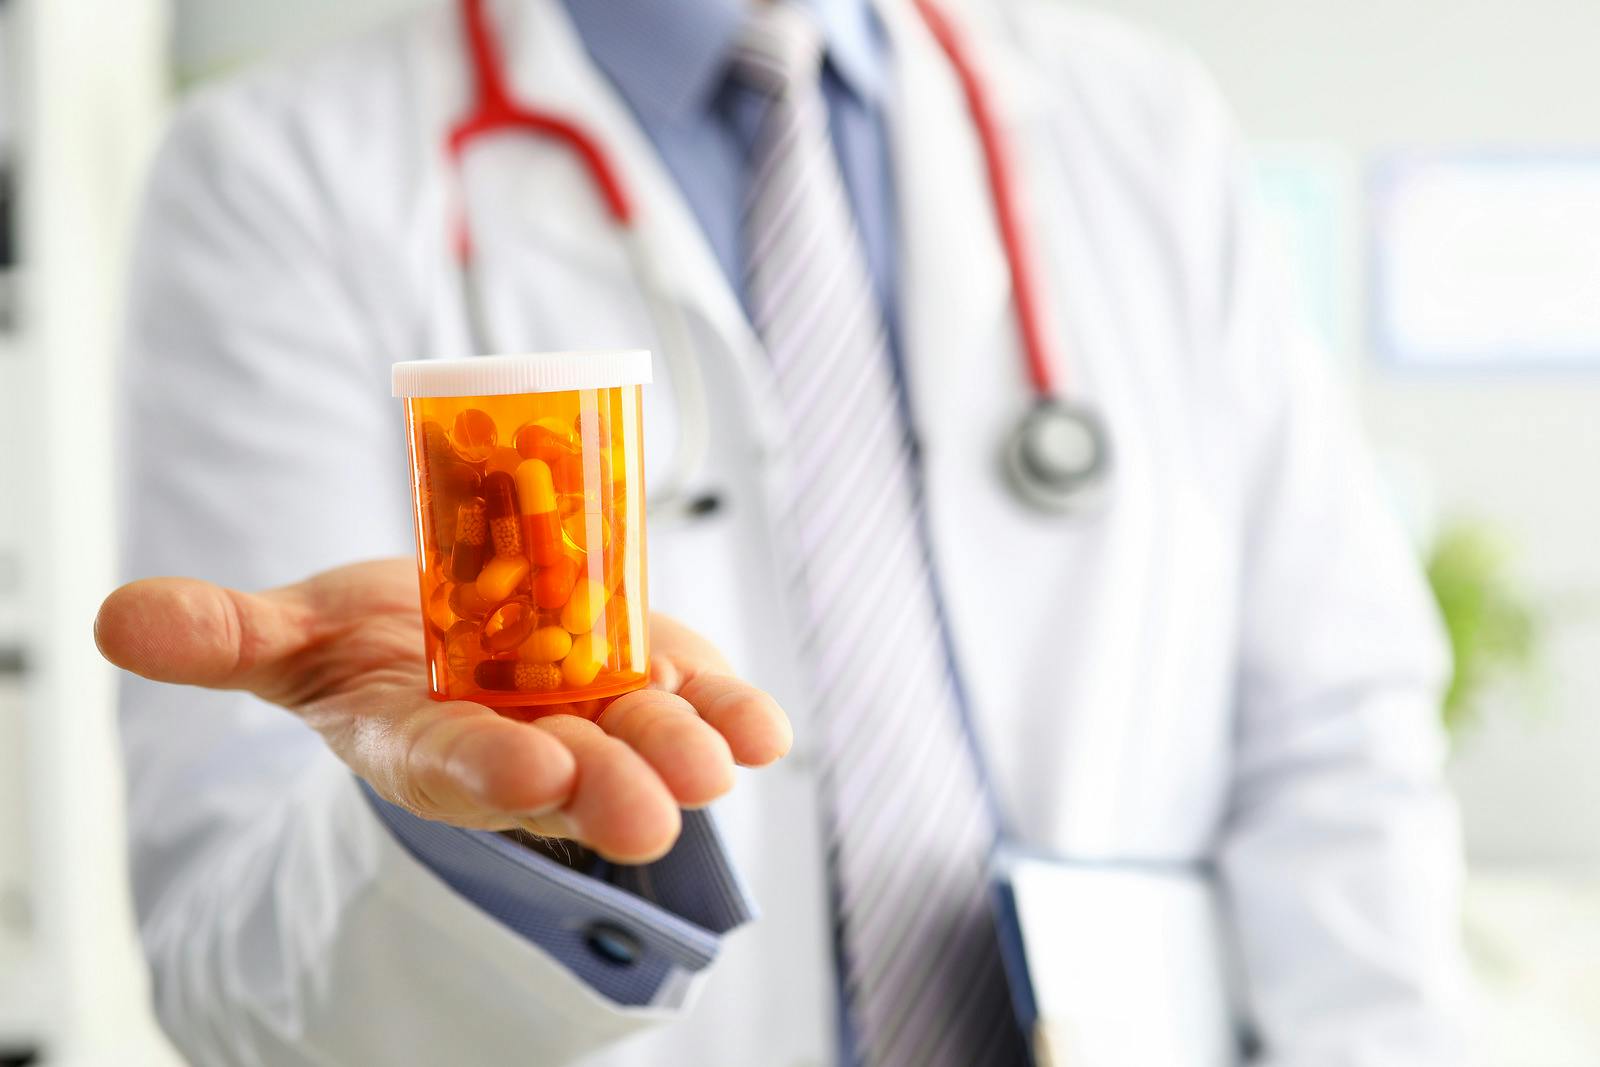 Hand holds out container of multiple pills doctors prescribe